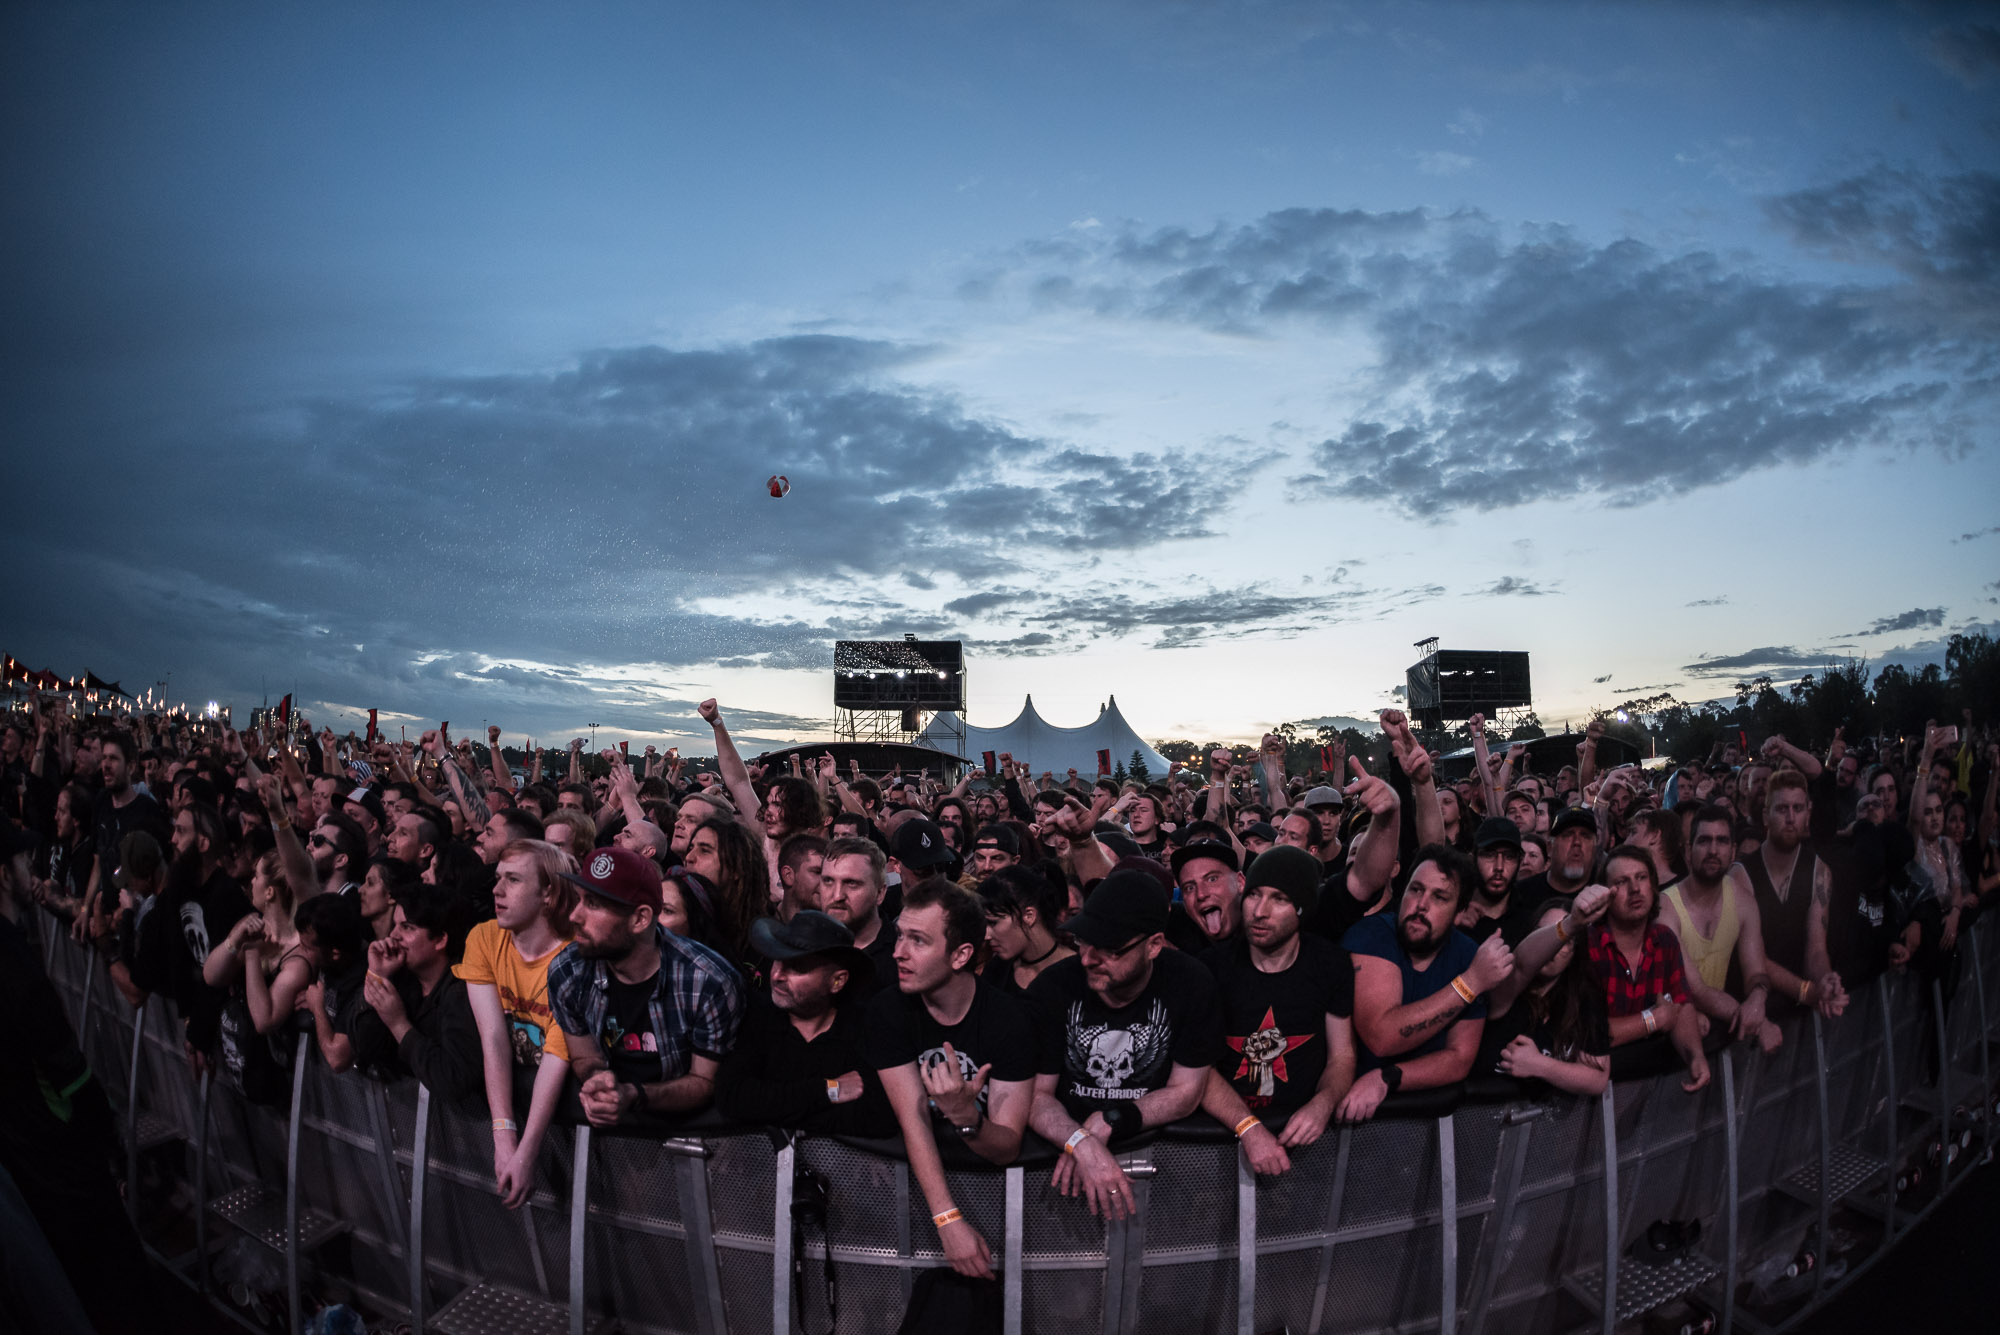 Download Festival Melbourne 2018 - Paul Tadday Photography - 051.jpg